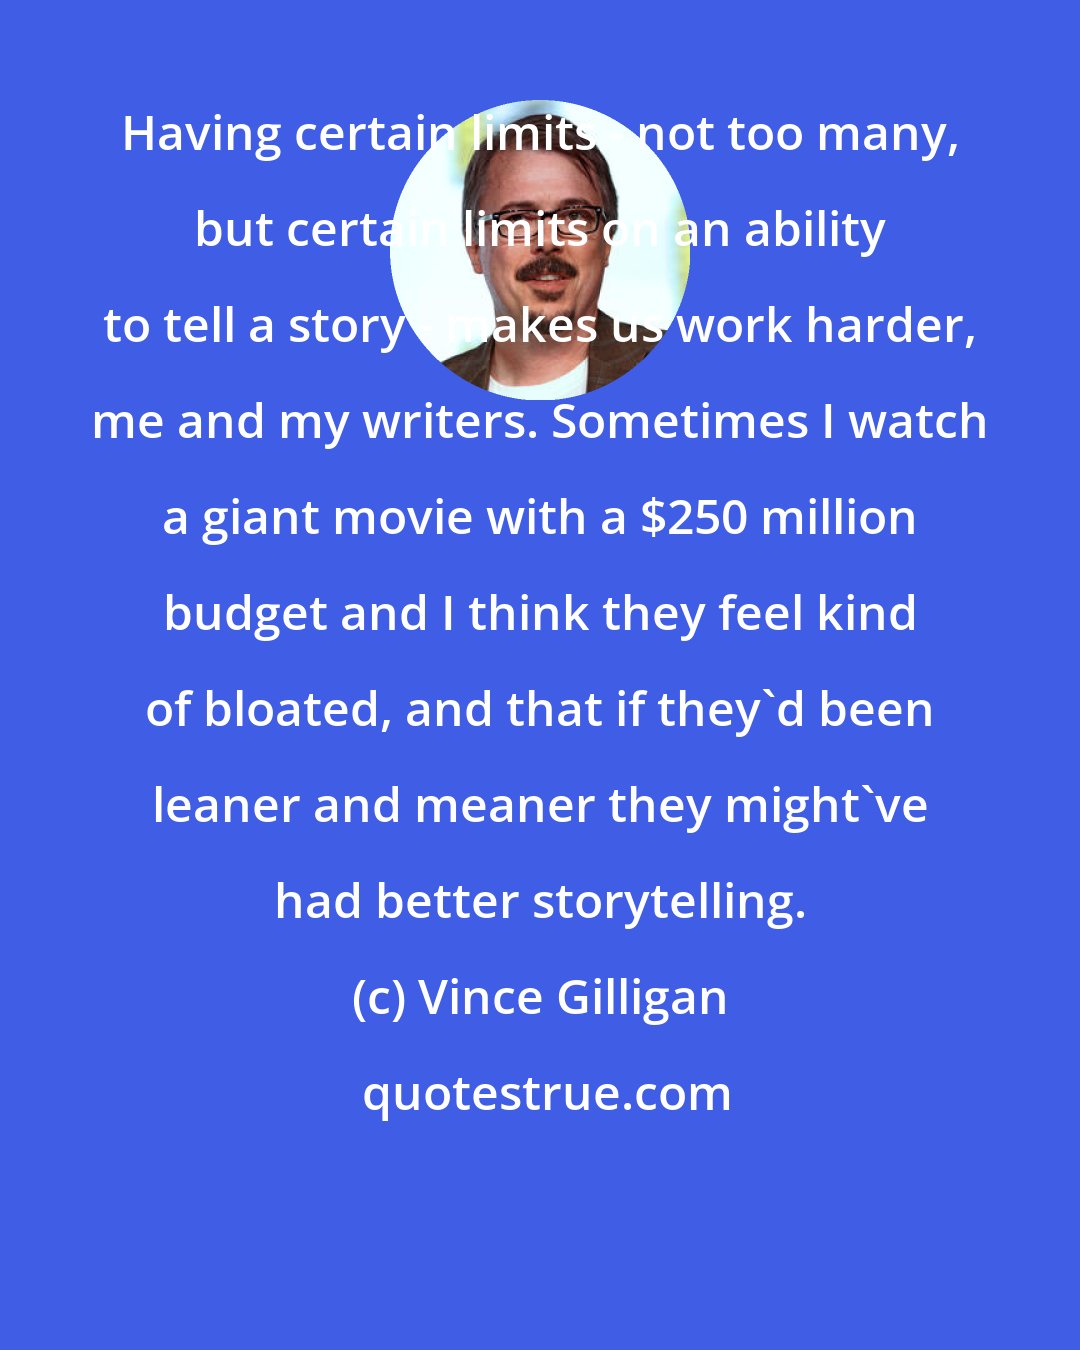 Vince Gilligan: Having certain limits - not too many, but certain limits on an ability to tell a story - makes us work harder, me and my writers. Sometimes I watch a giant movie with a $250 million budget and I think they feel kind of bloated, and that if they'd been leaner and meaner they might've had better storytelling.